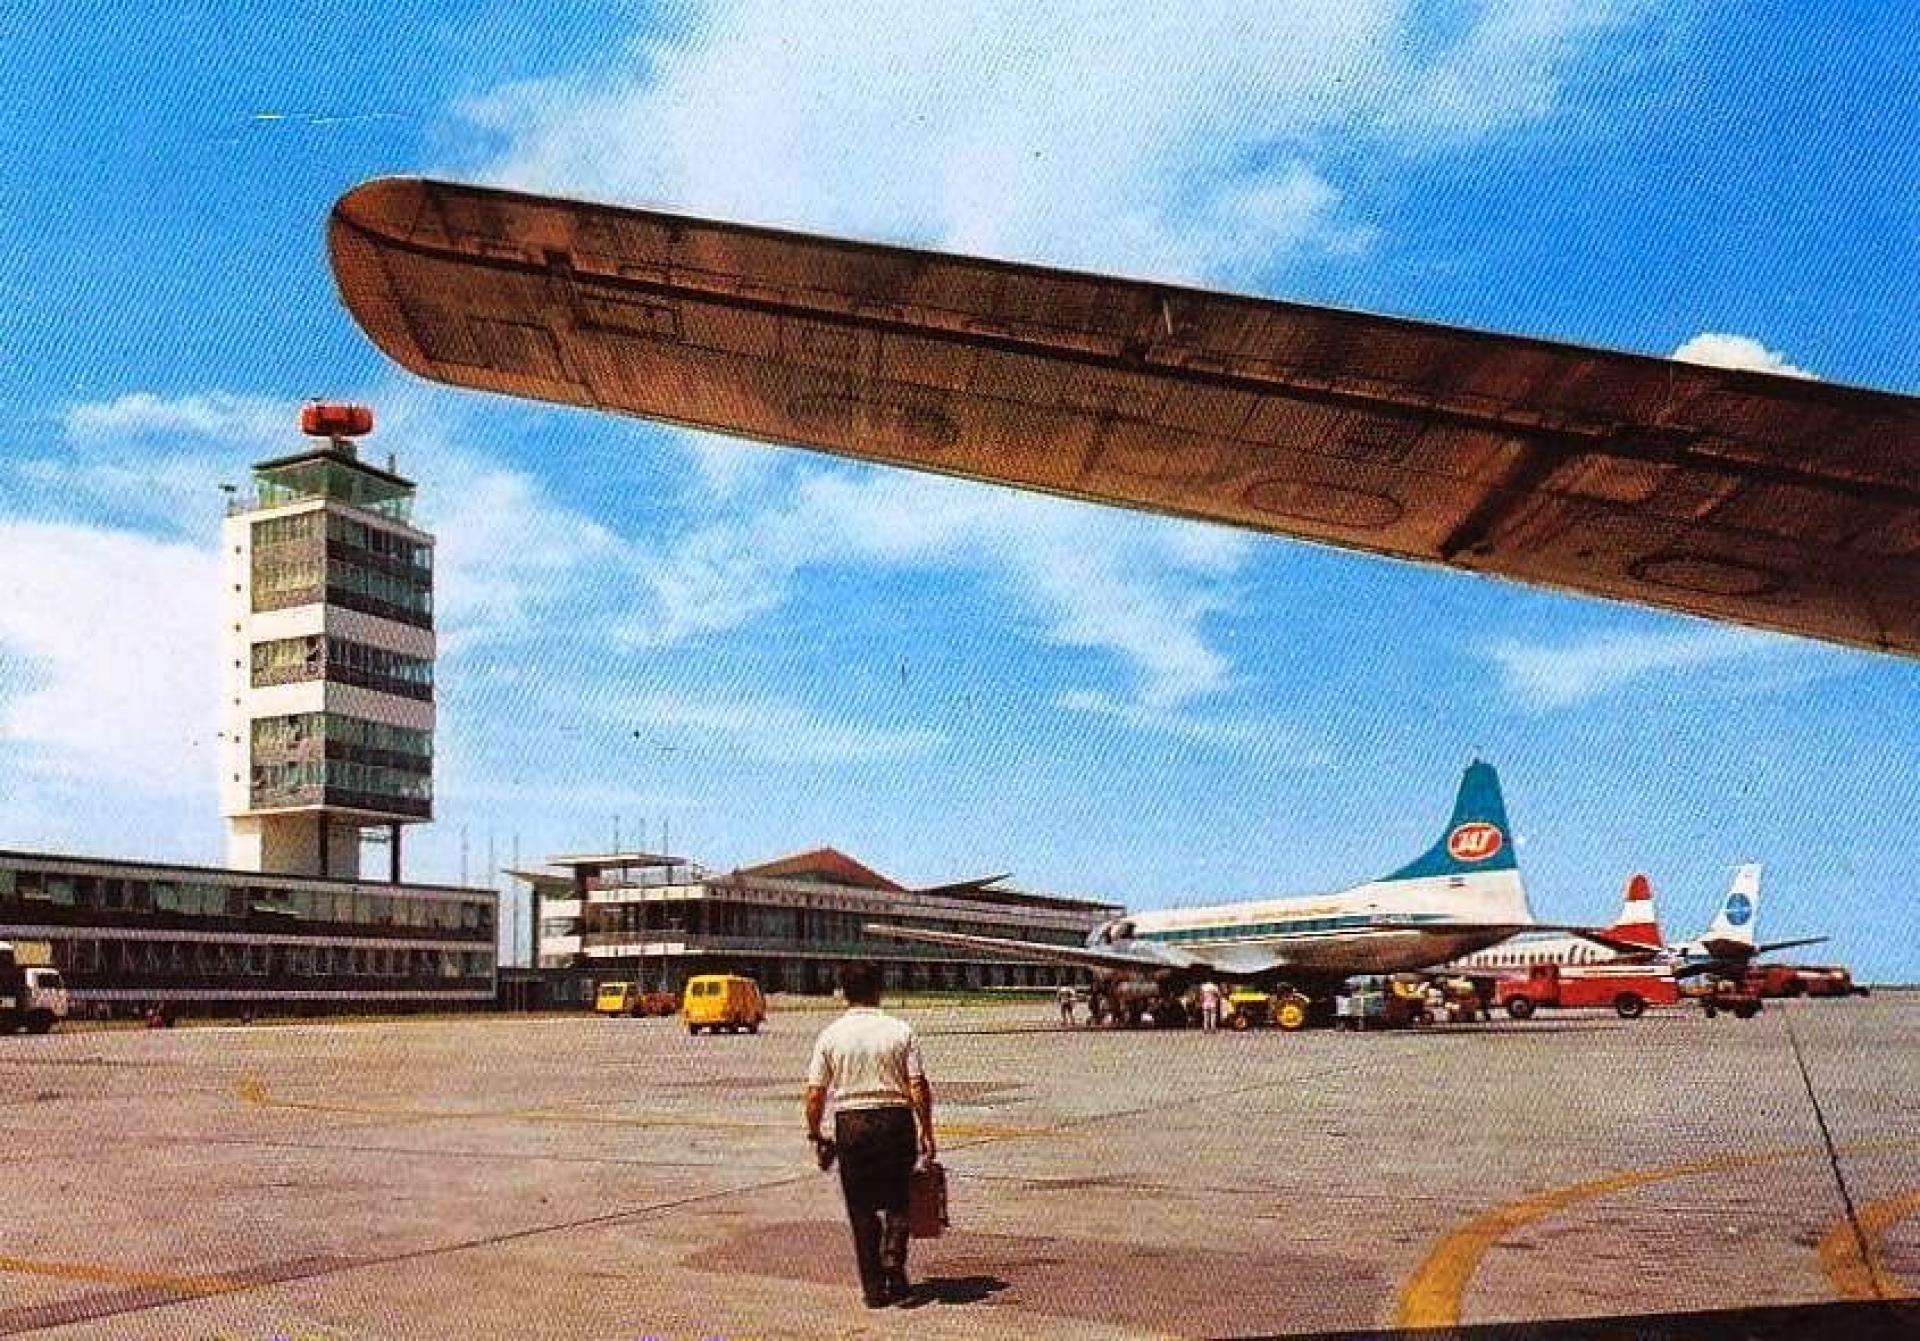 Belgrade Airport in the late 1960s.| Photo via exyuaviation